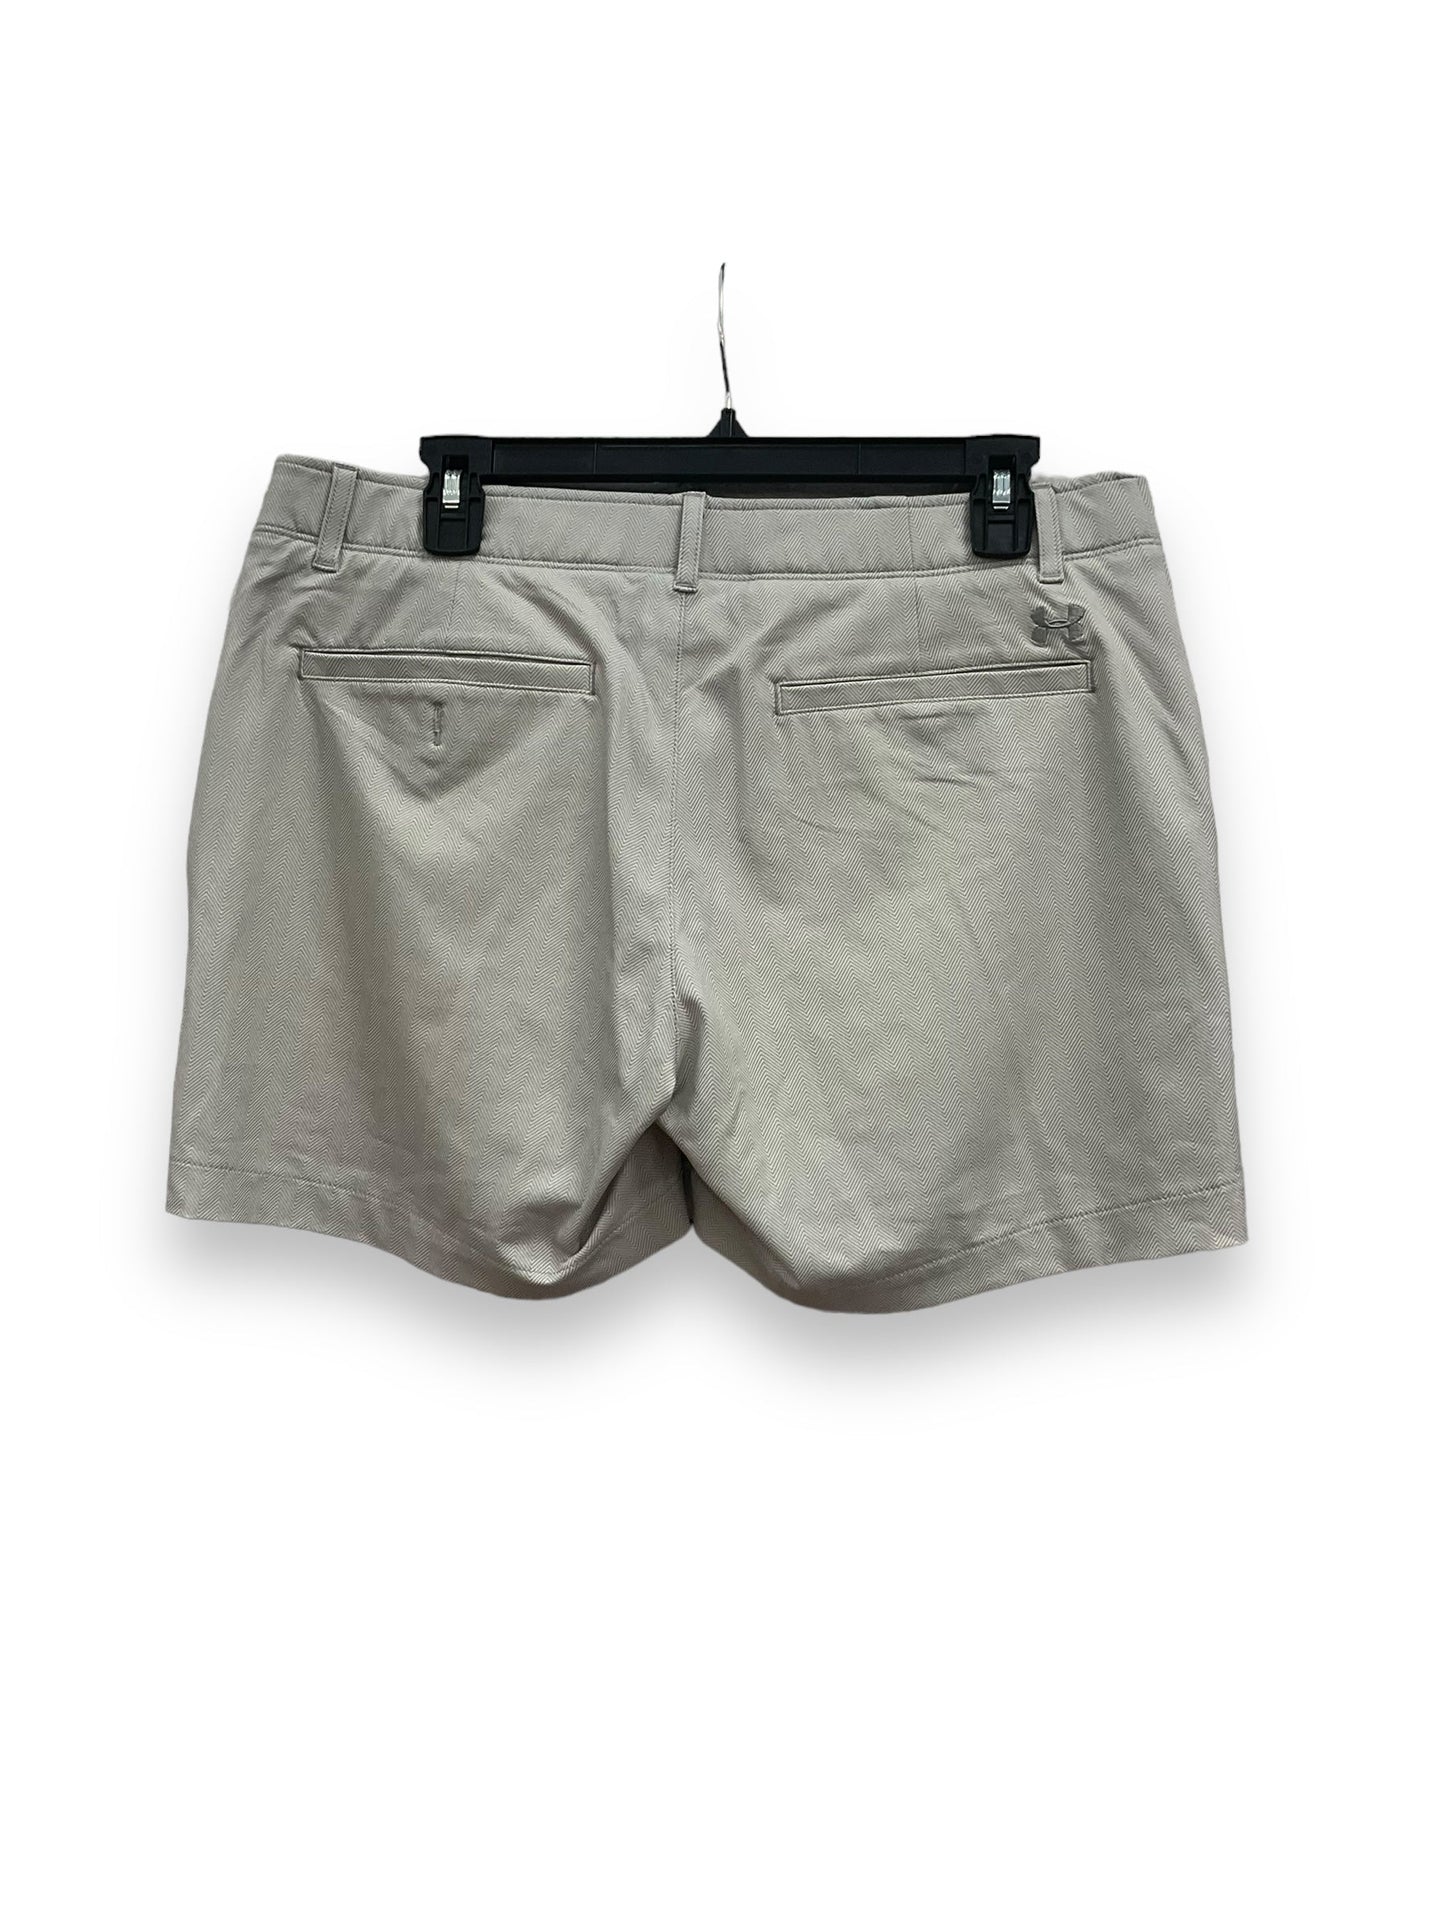 Grey Shorts Under Armour, Size 12